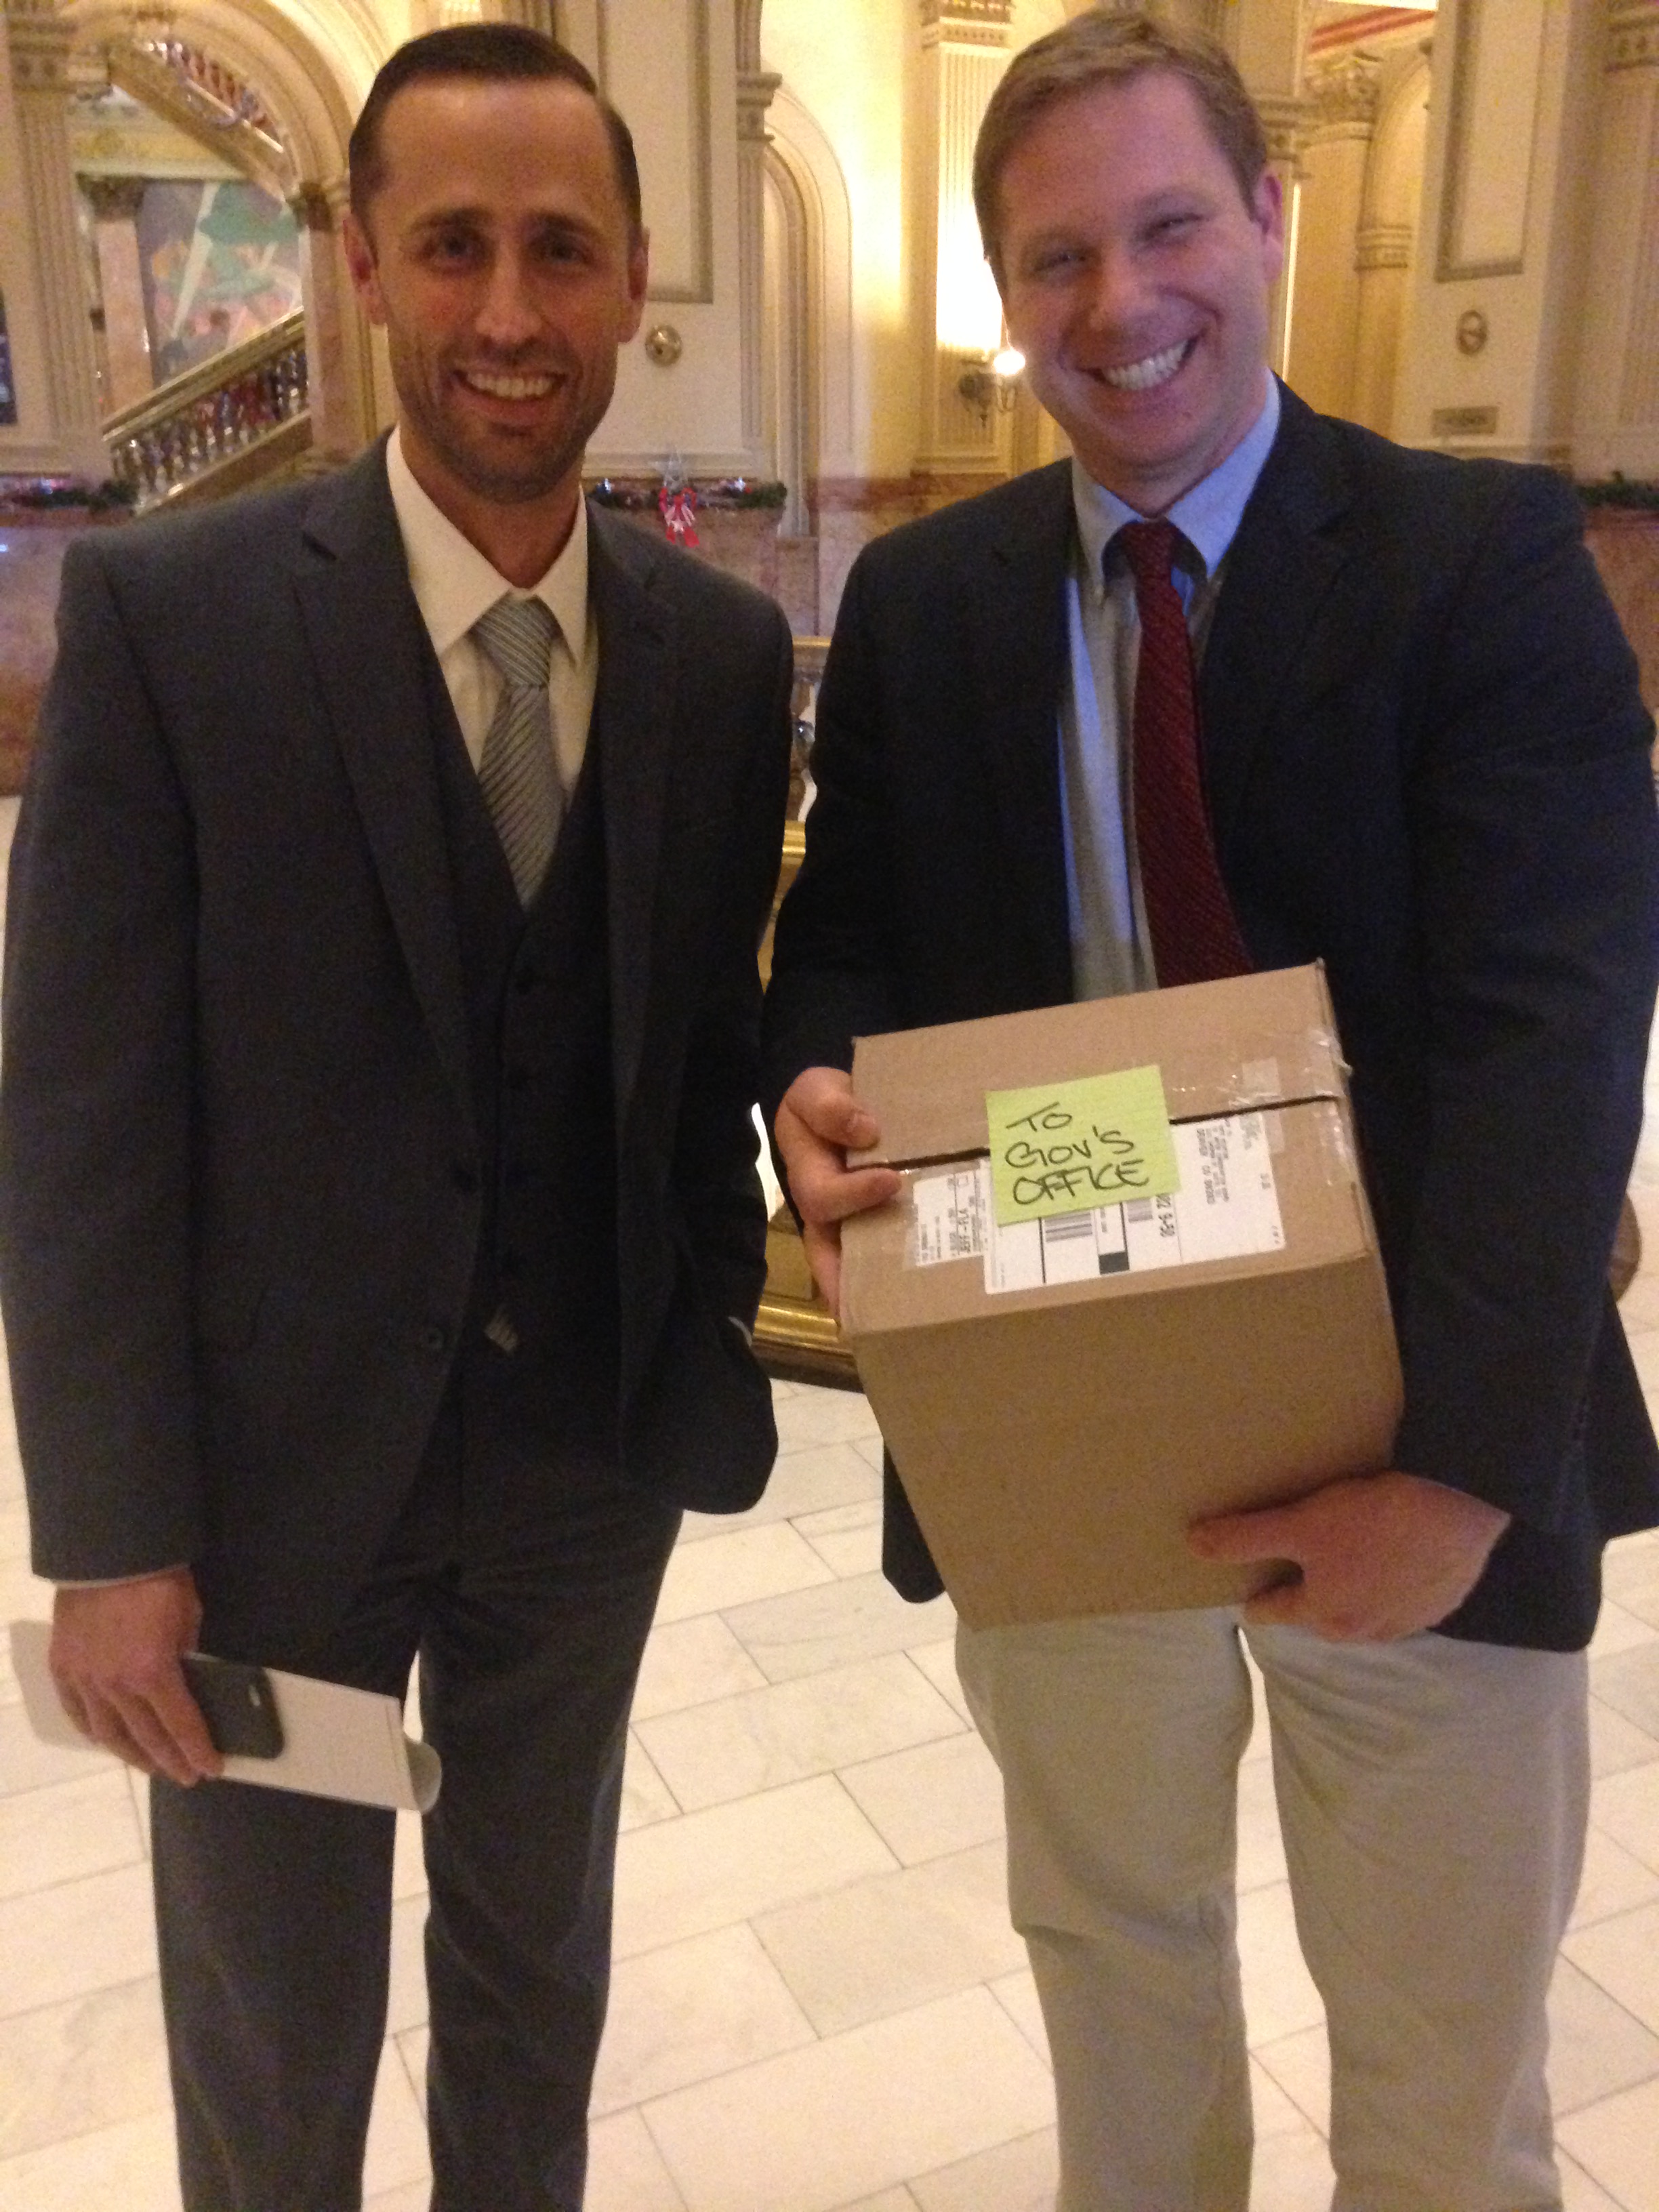 CWCB director James Eklund with manager in Water Supply Planning, Jacob Bornstein bring  a box containing the draft water plan to the Capitol.